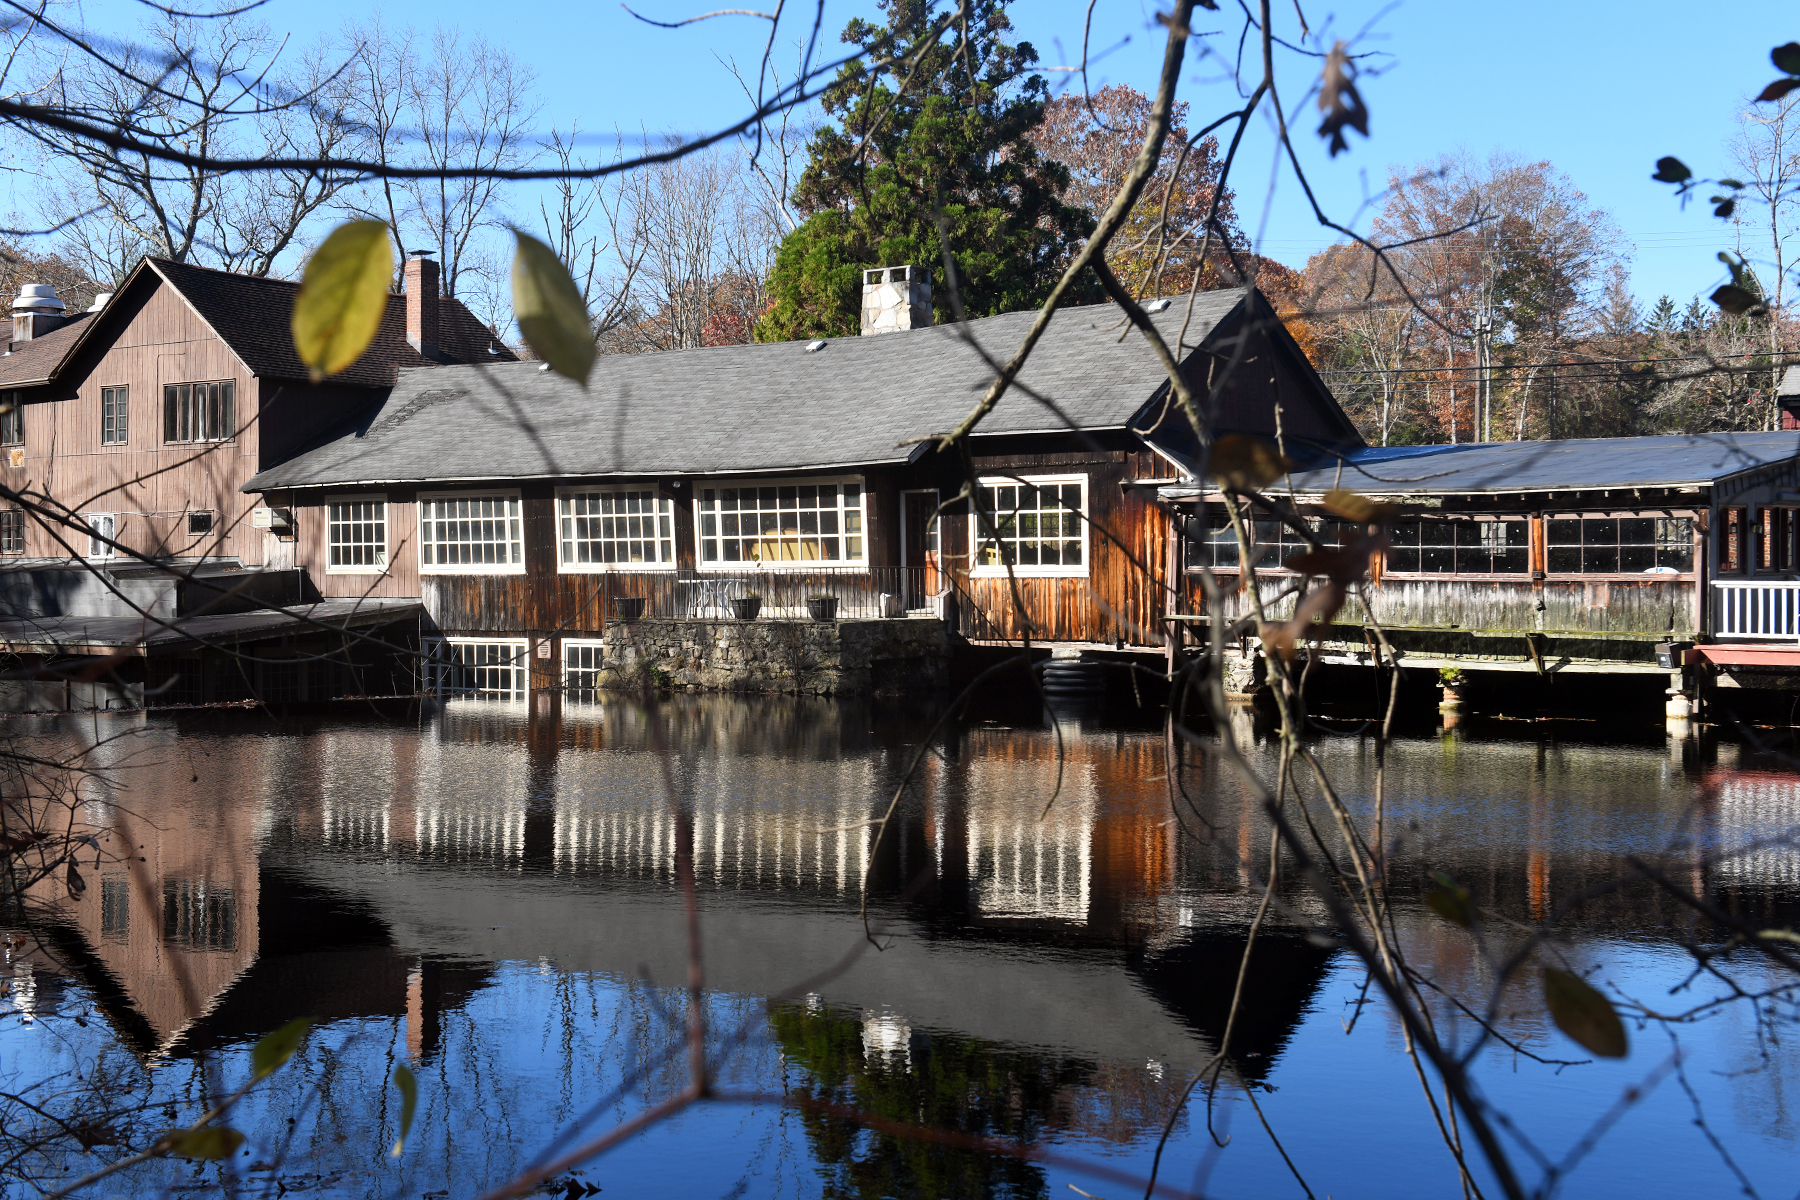 Cobb’s Mill Inn wrongly listed on the market on-line, homeowners say